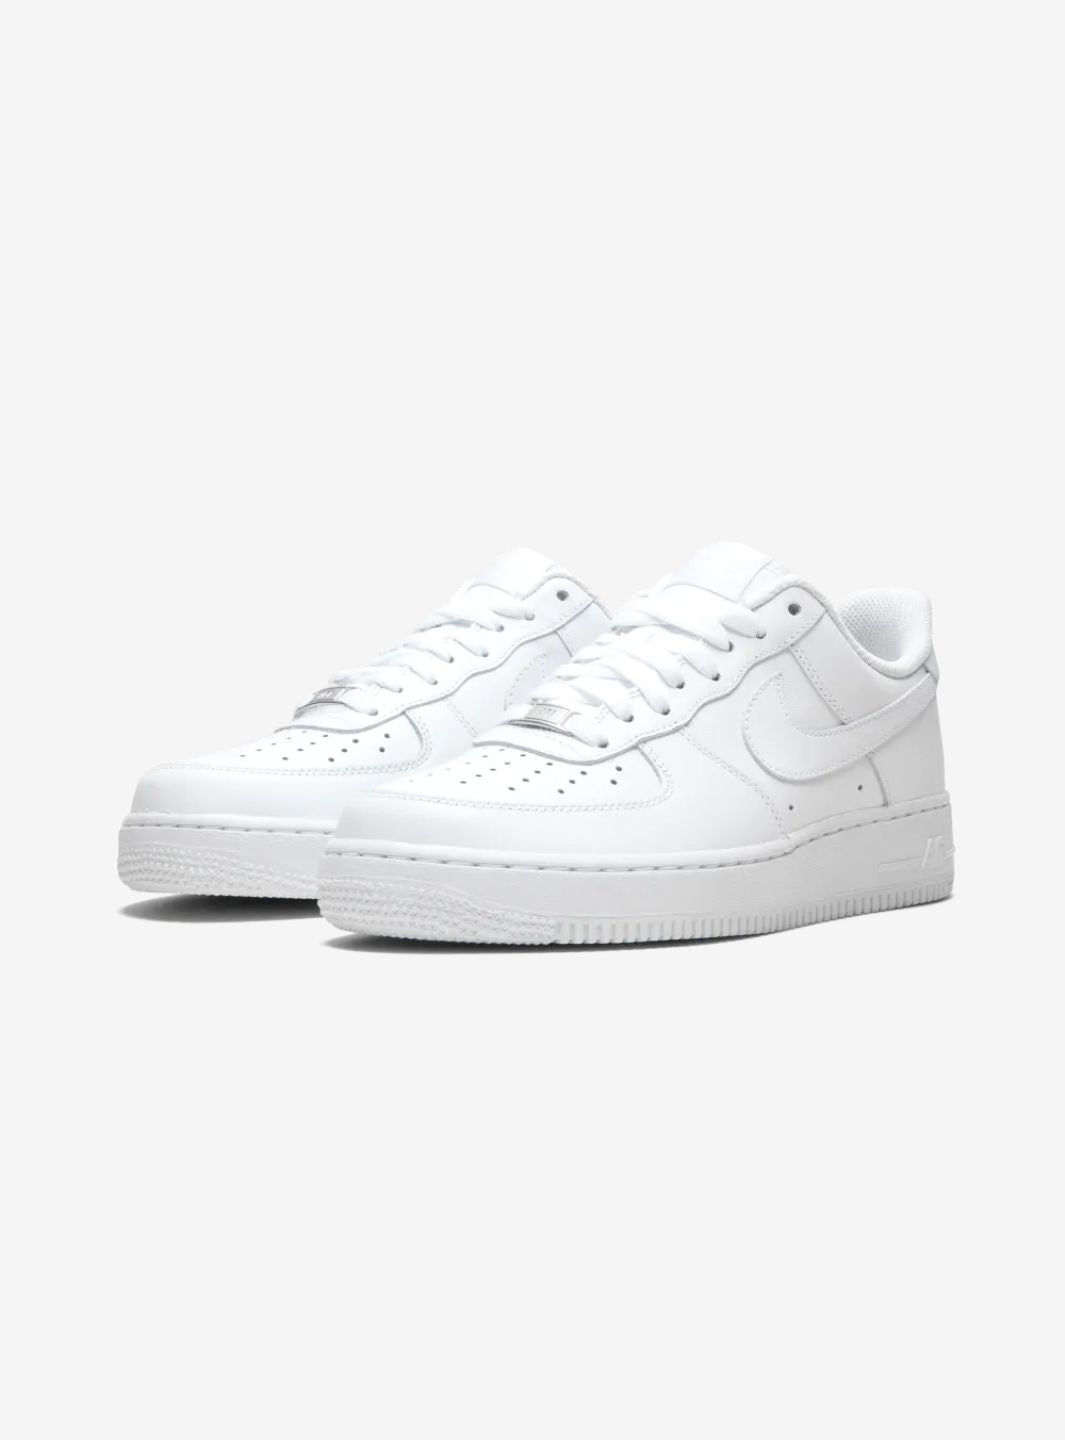 Nike Air Force 1 Low '07 White - DH2920-111 | ResellZone